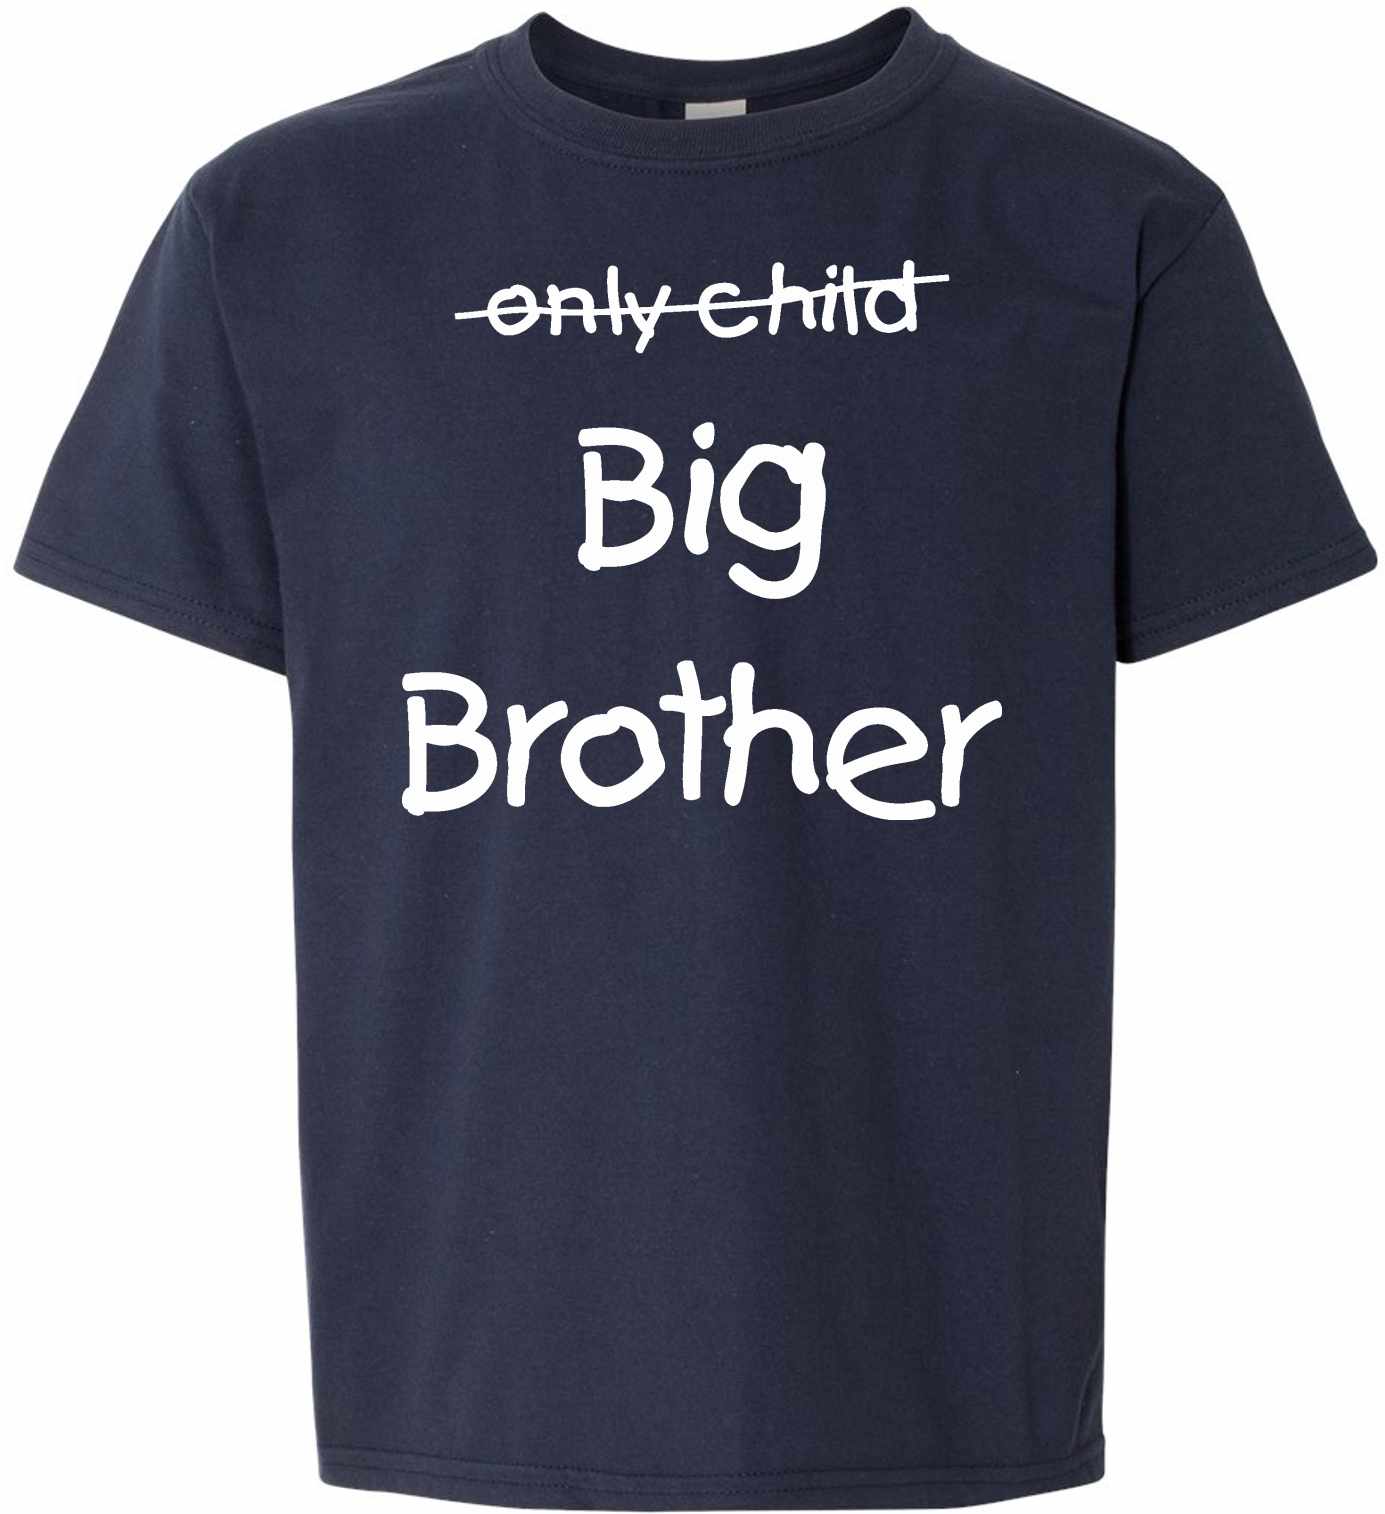 Only Child BIG BROTHER on Kids T-Shirt (#965-201)